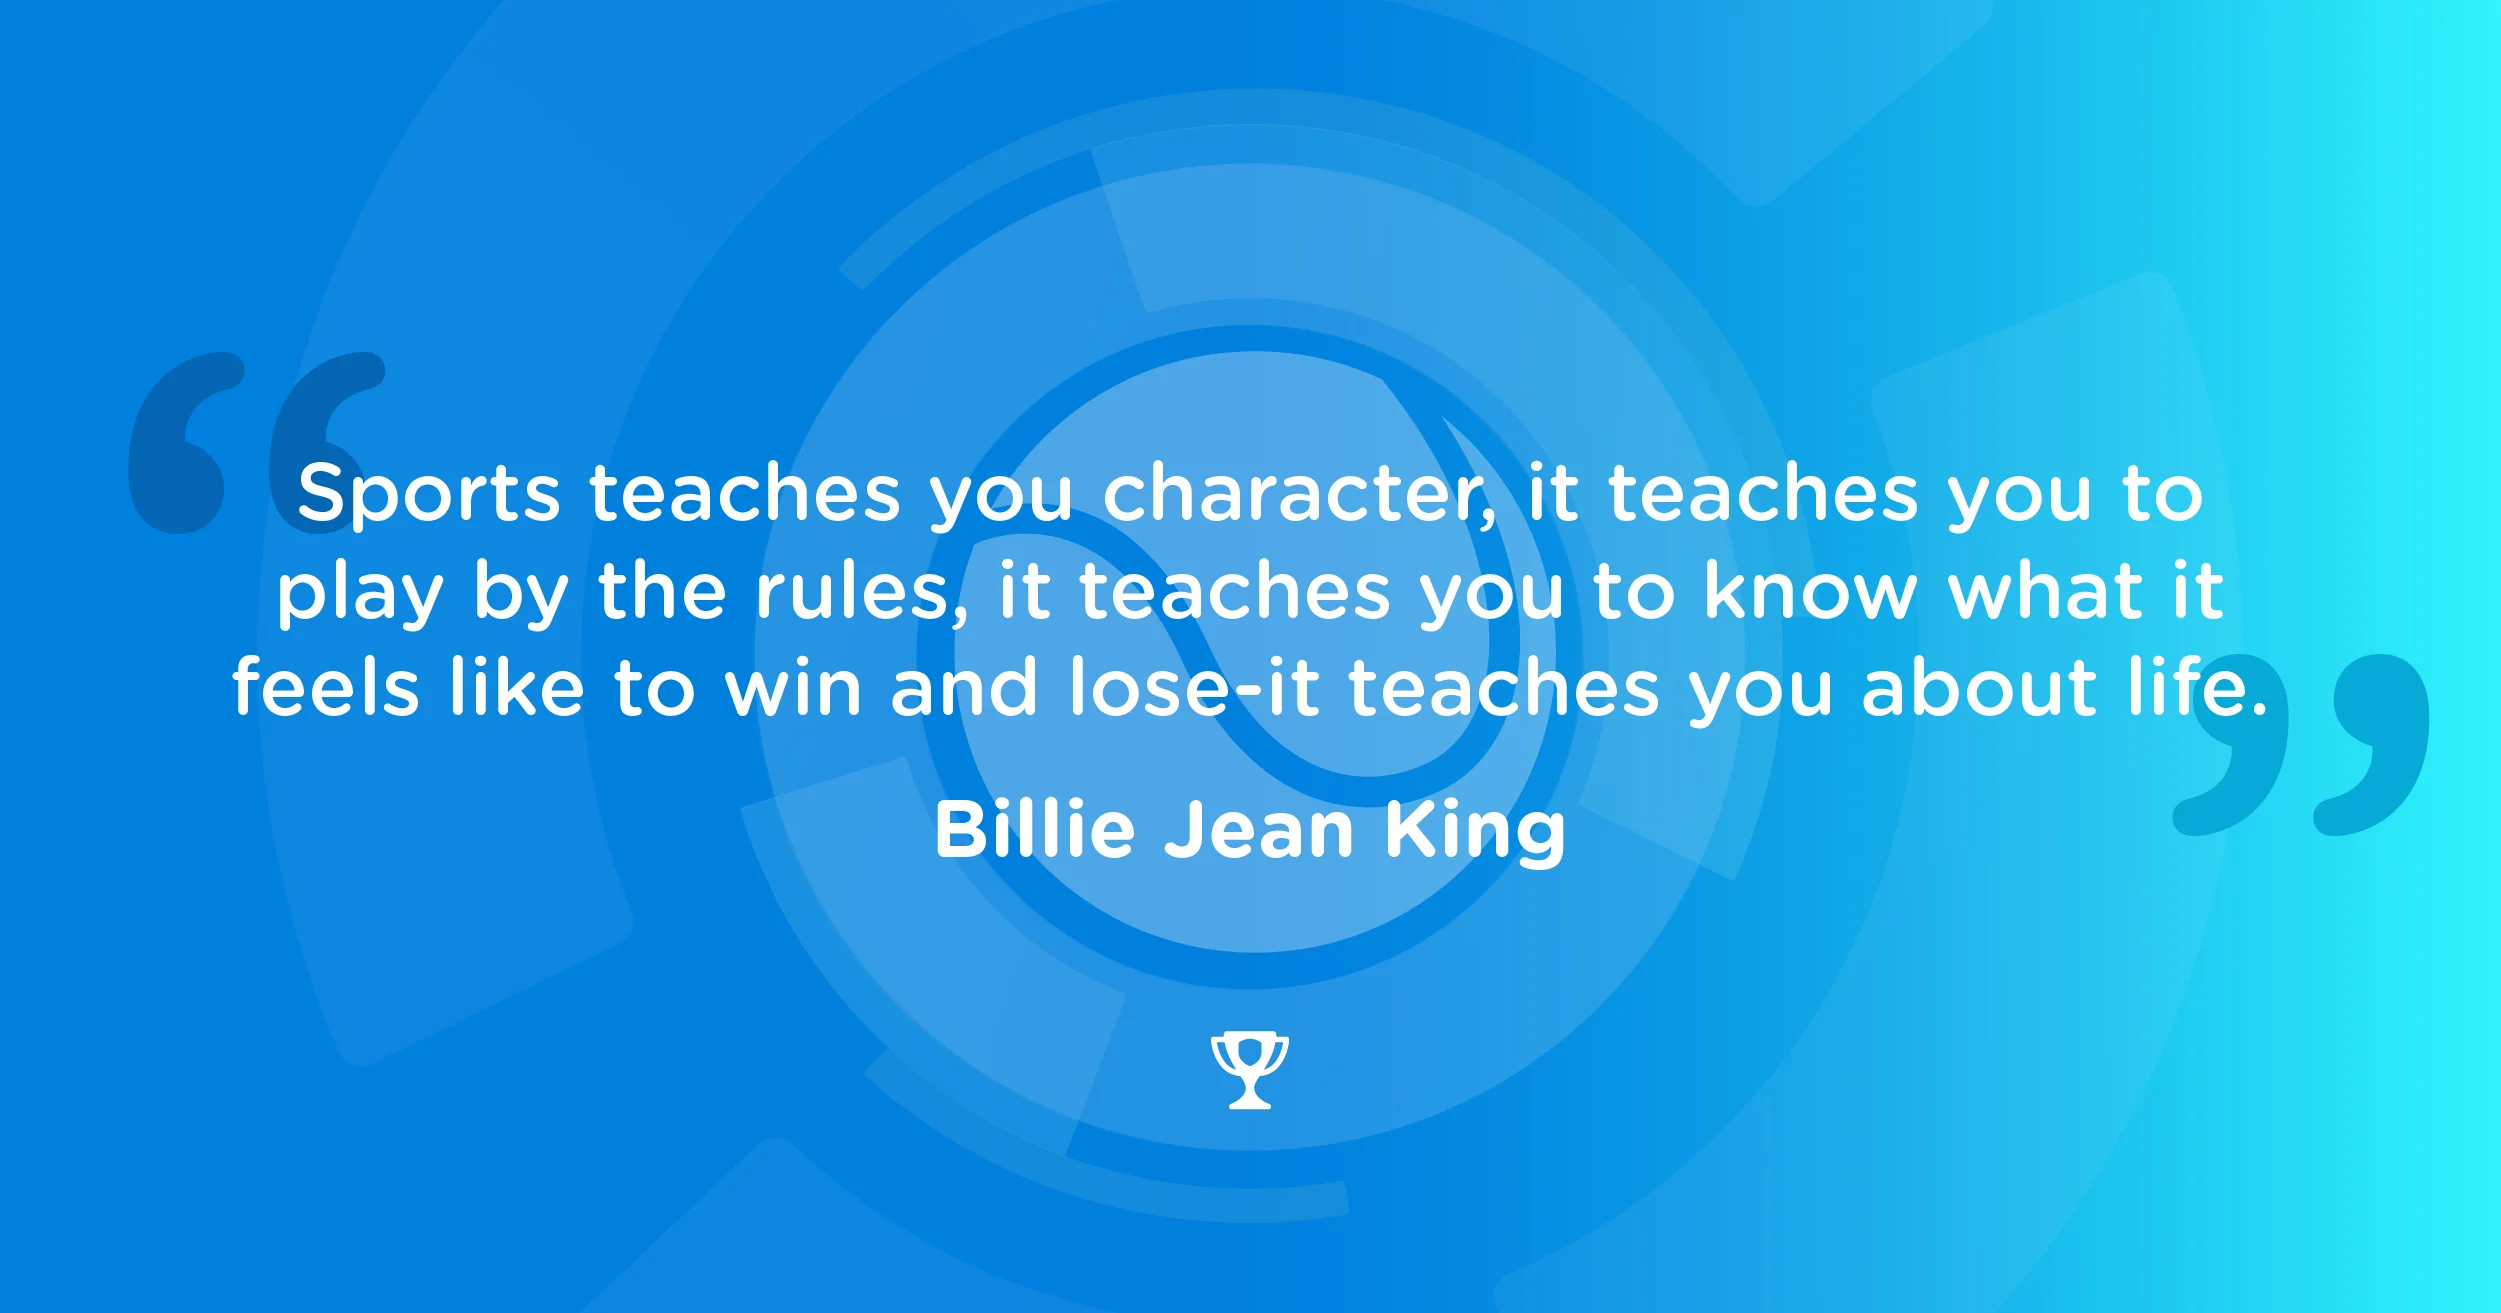 billie jean king youth sports quote sports teaches you character